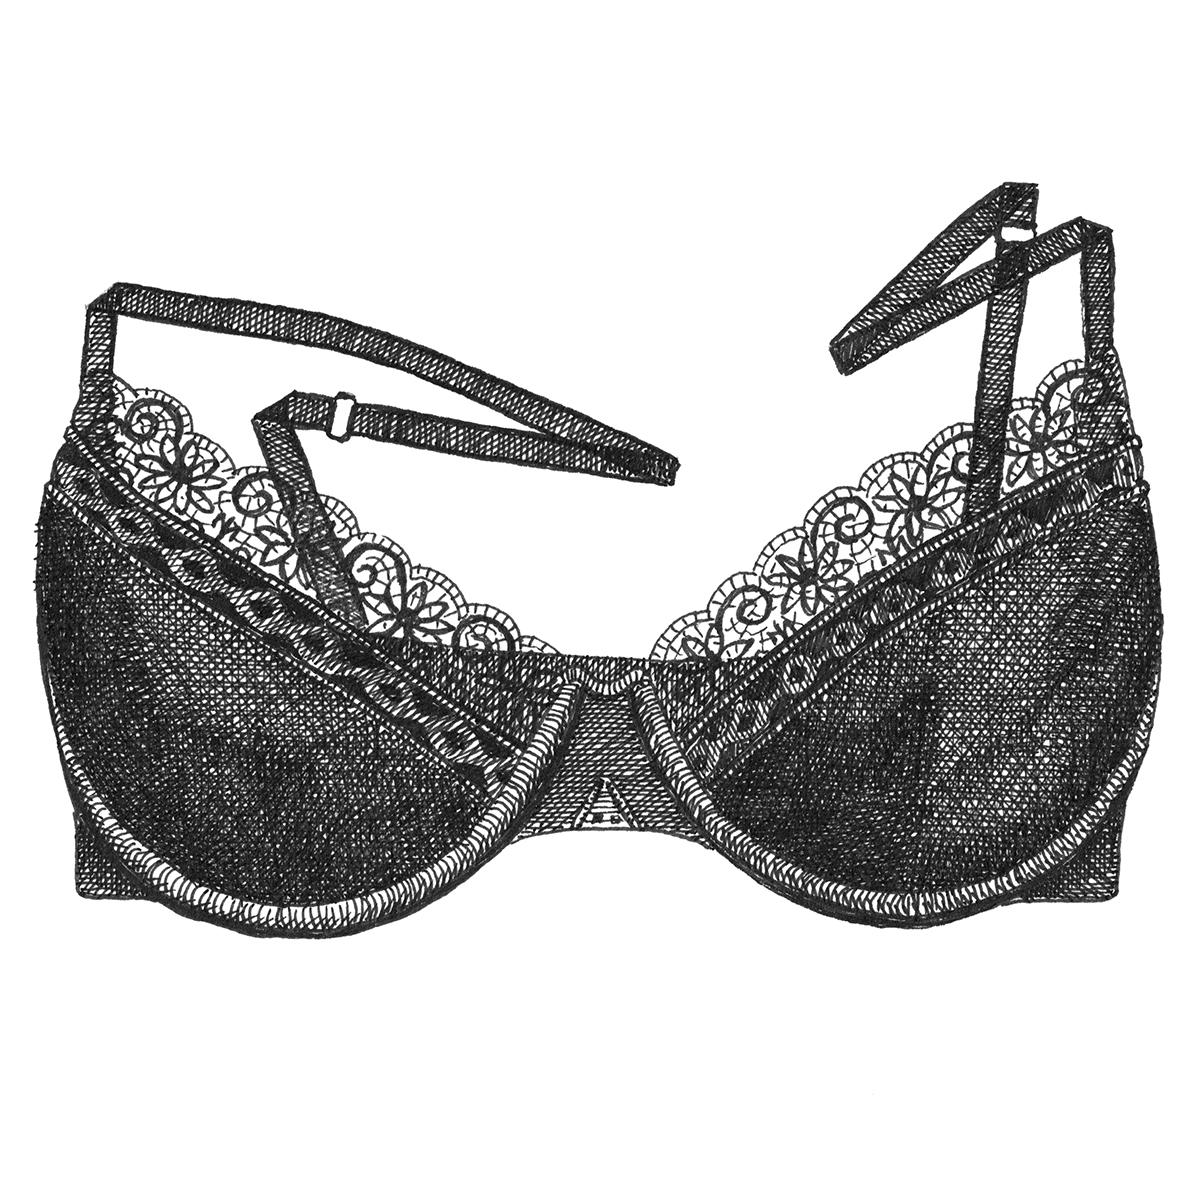 Limited edition print from pen and ink drawing of a lacy bra